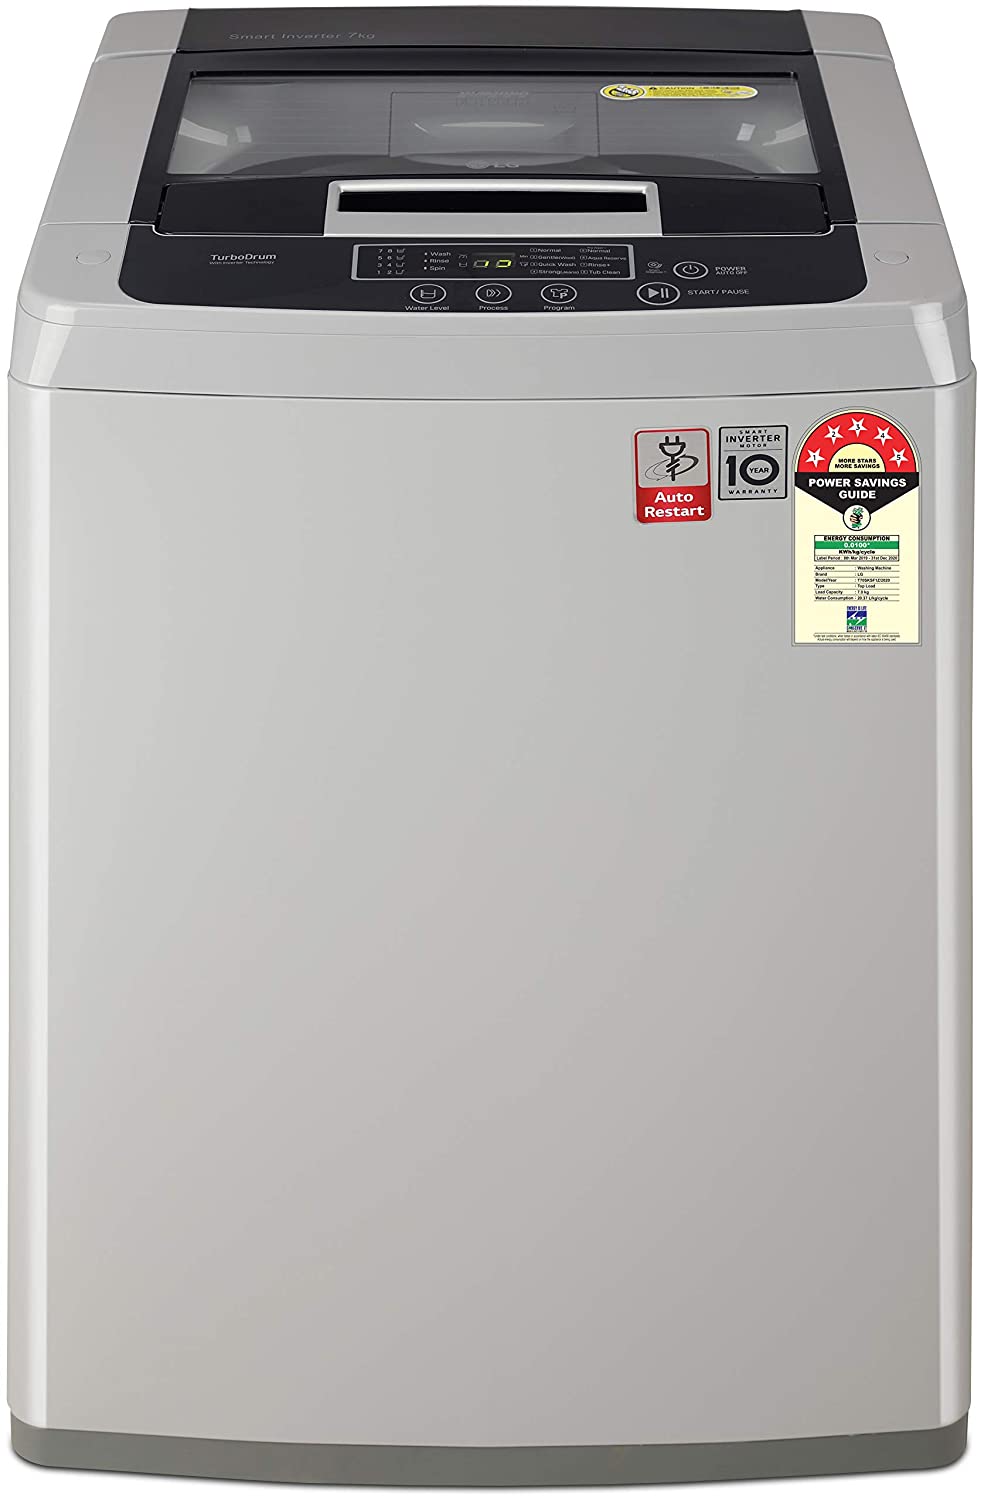 LG ‎T70SKSF1Z 7 kg Fully-Automatic Top Loading Washing Machine